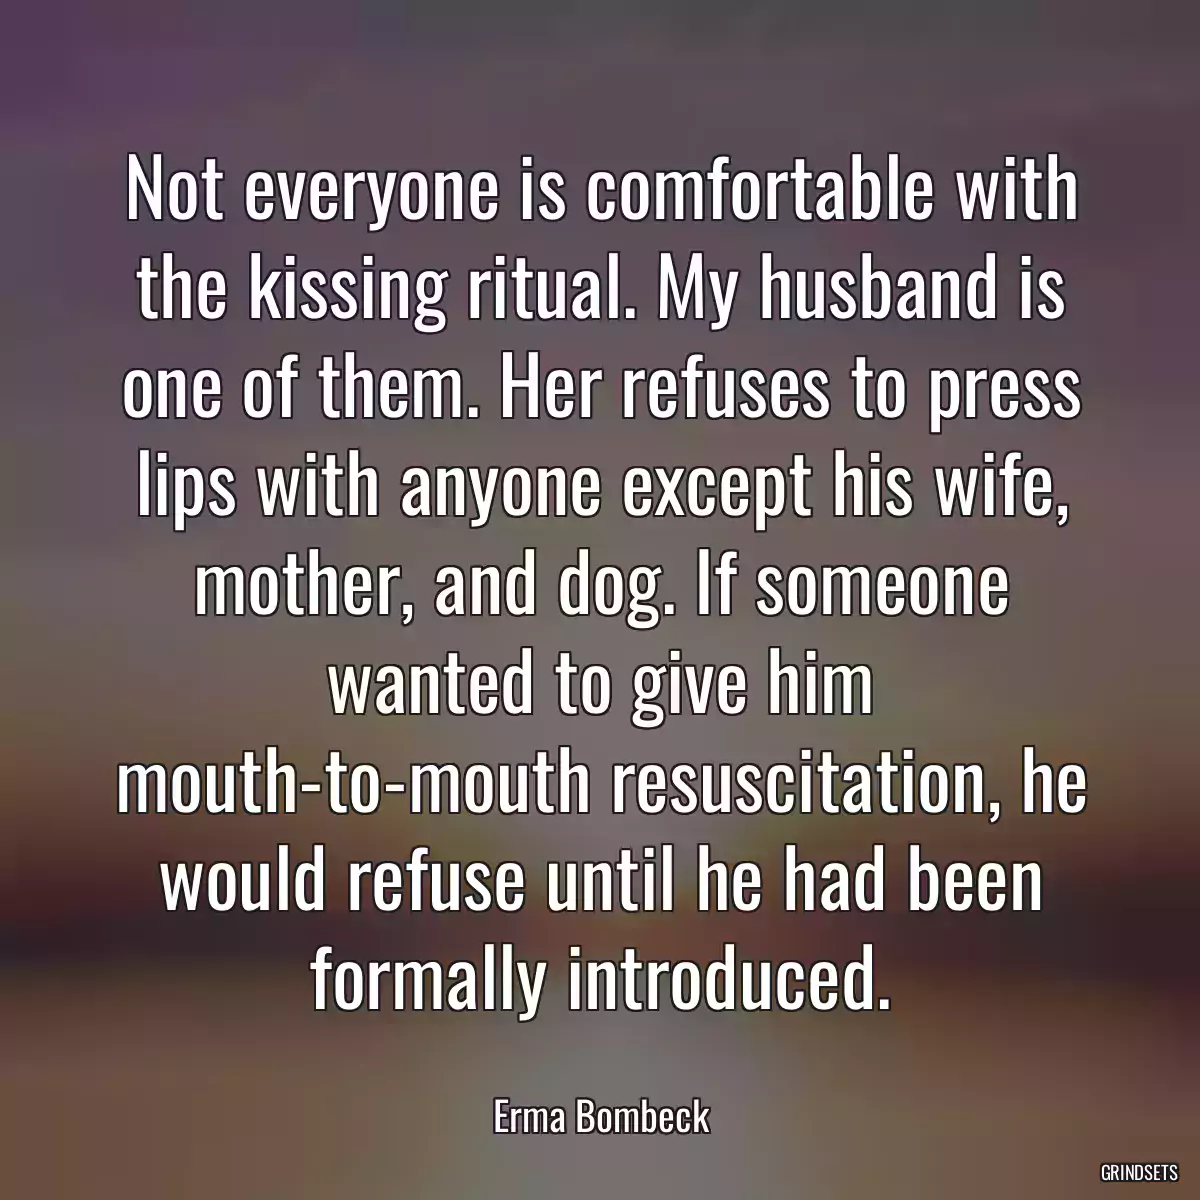 Not everyone is comfortable with the kissing ritual. My husband is one of them. Her refuses to press lips with anyone except his wife, mother, and dog. If someone wanted to give him mouth-to-mouth resuscitation, he would refuse until he had been formally introduced.